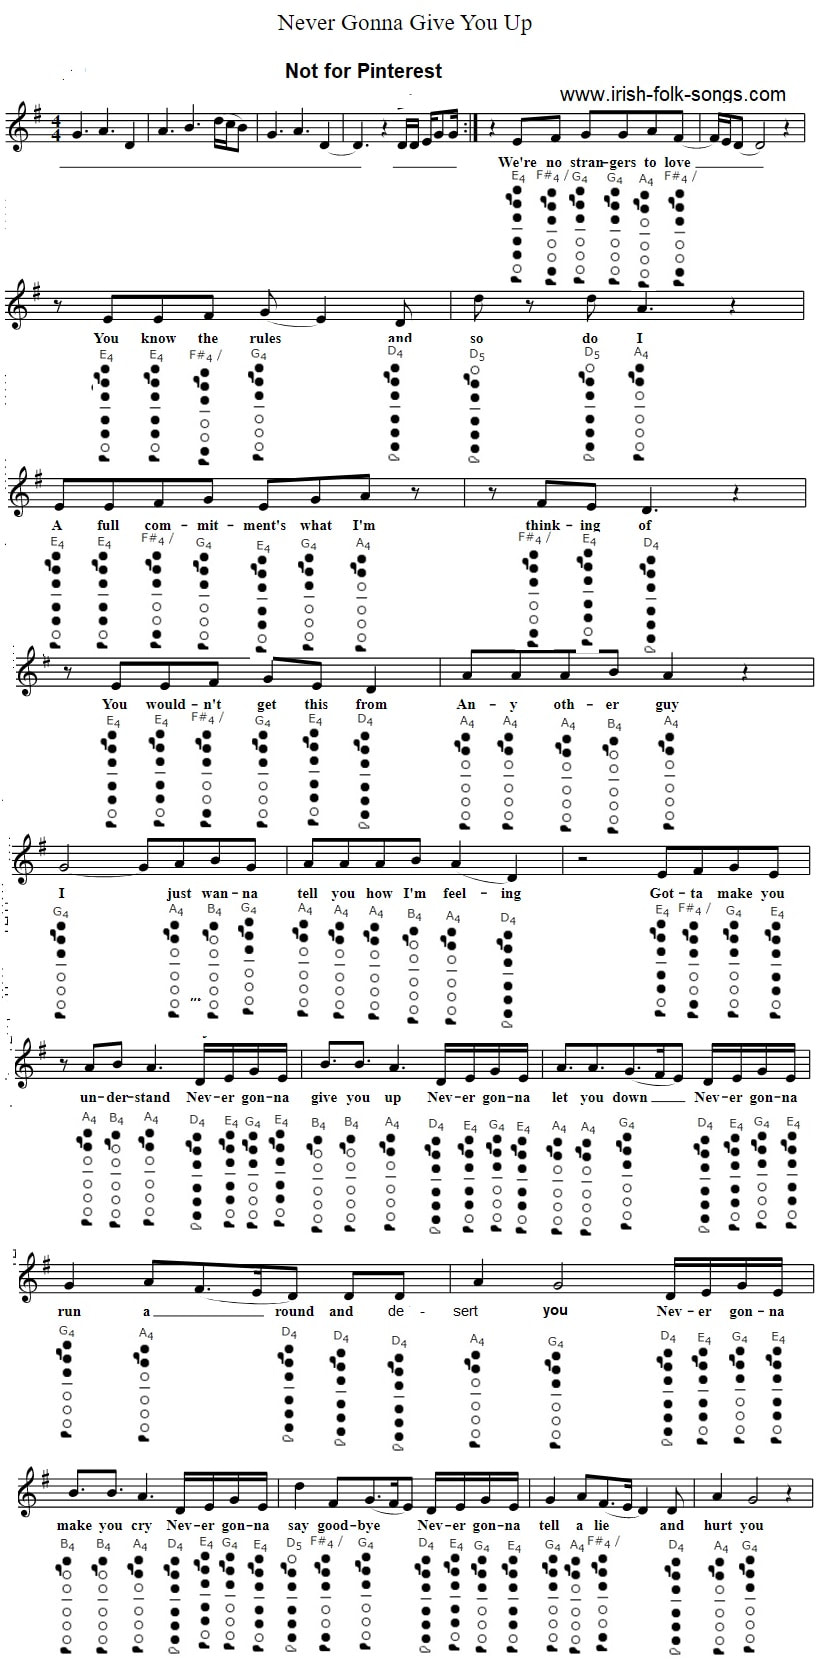 Never Gonna Give You up rick Roll chorus Only Intermediate Piano Sheet  Music With Note Names & Lyrics Printable Downloadable 